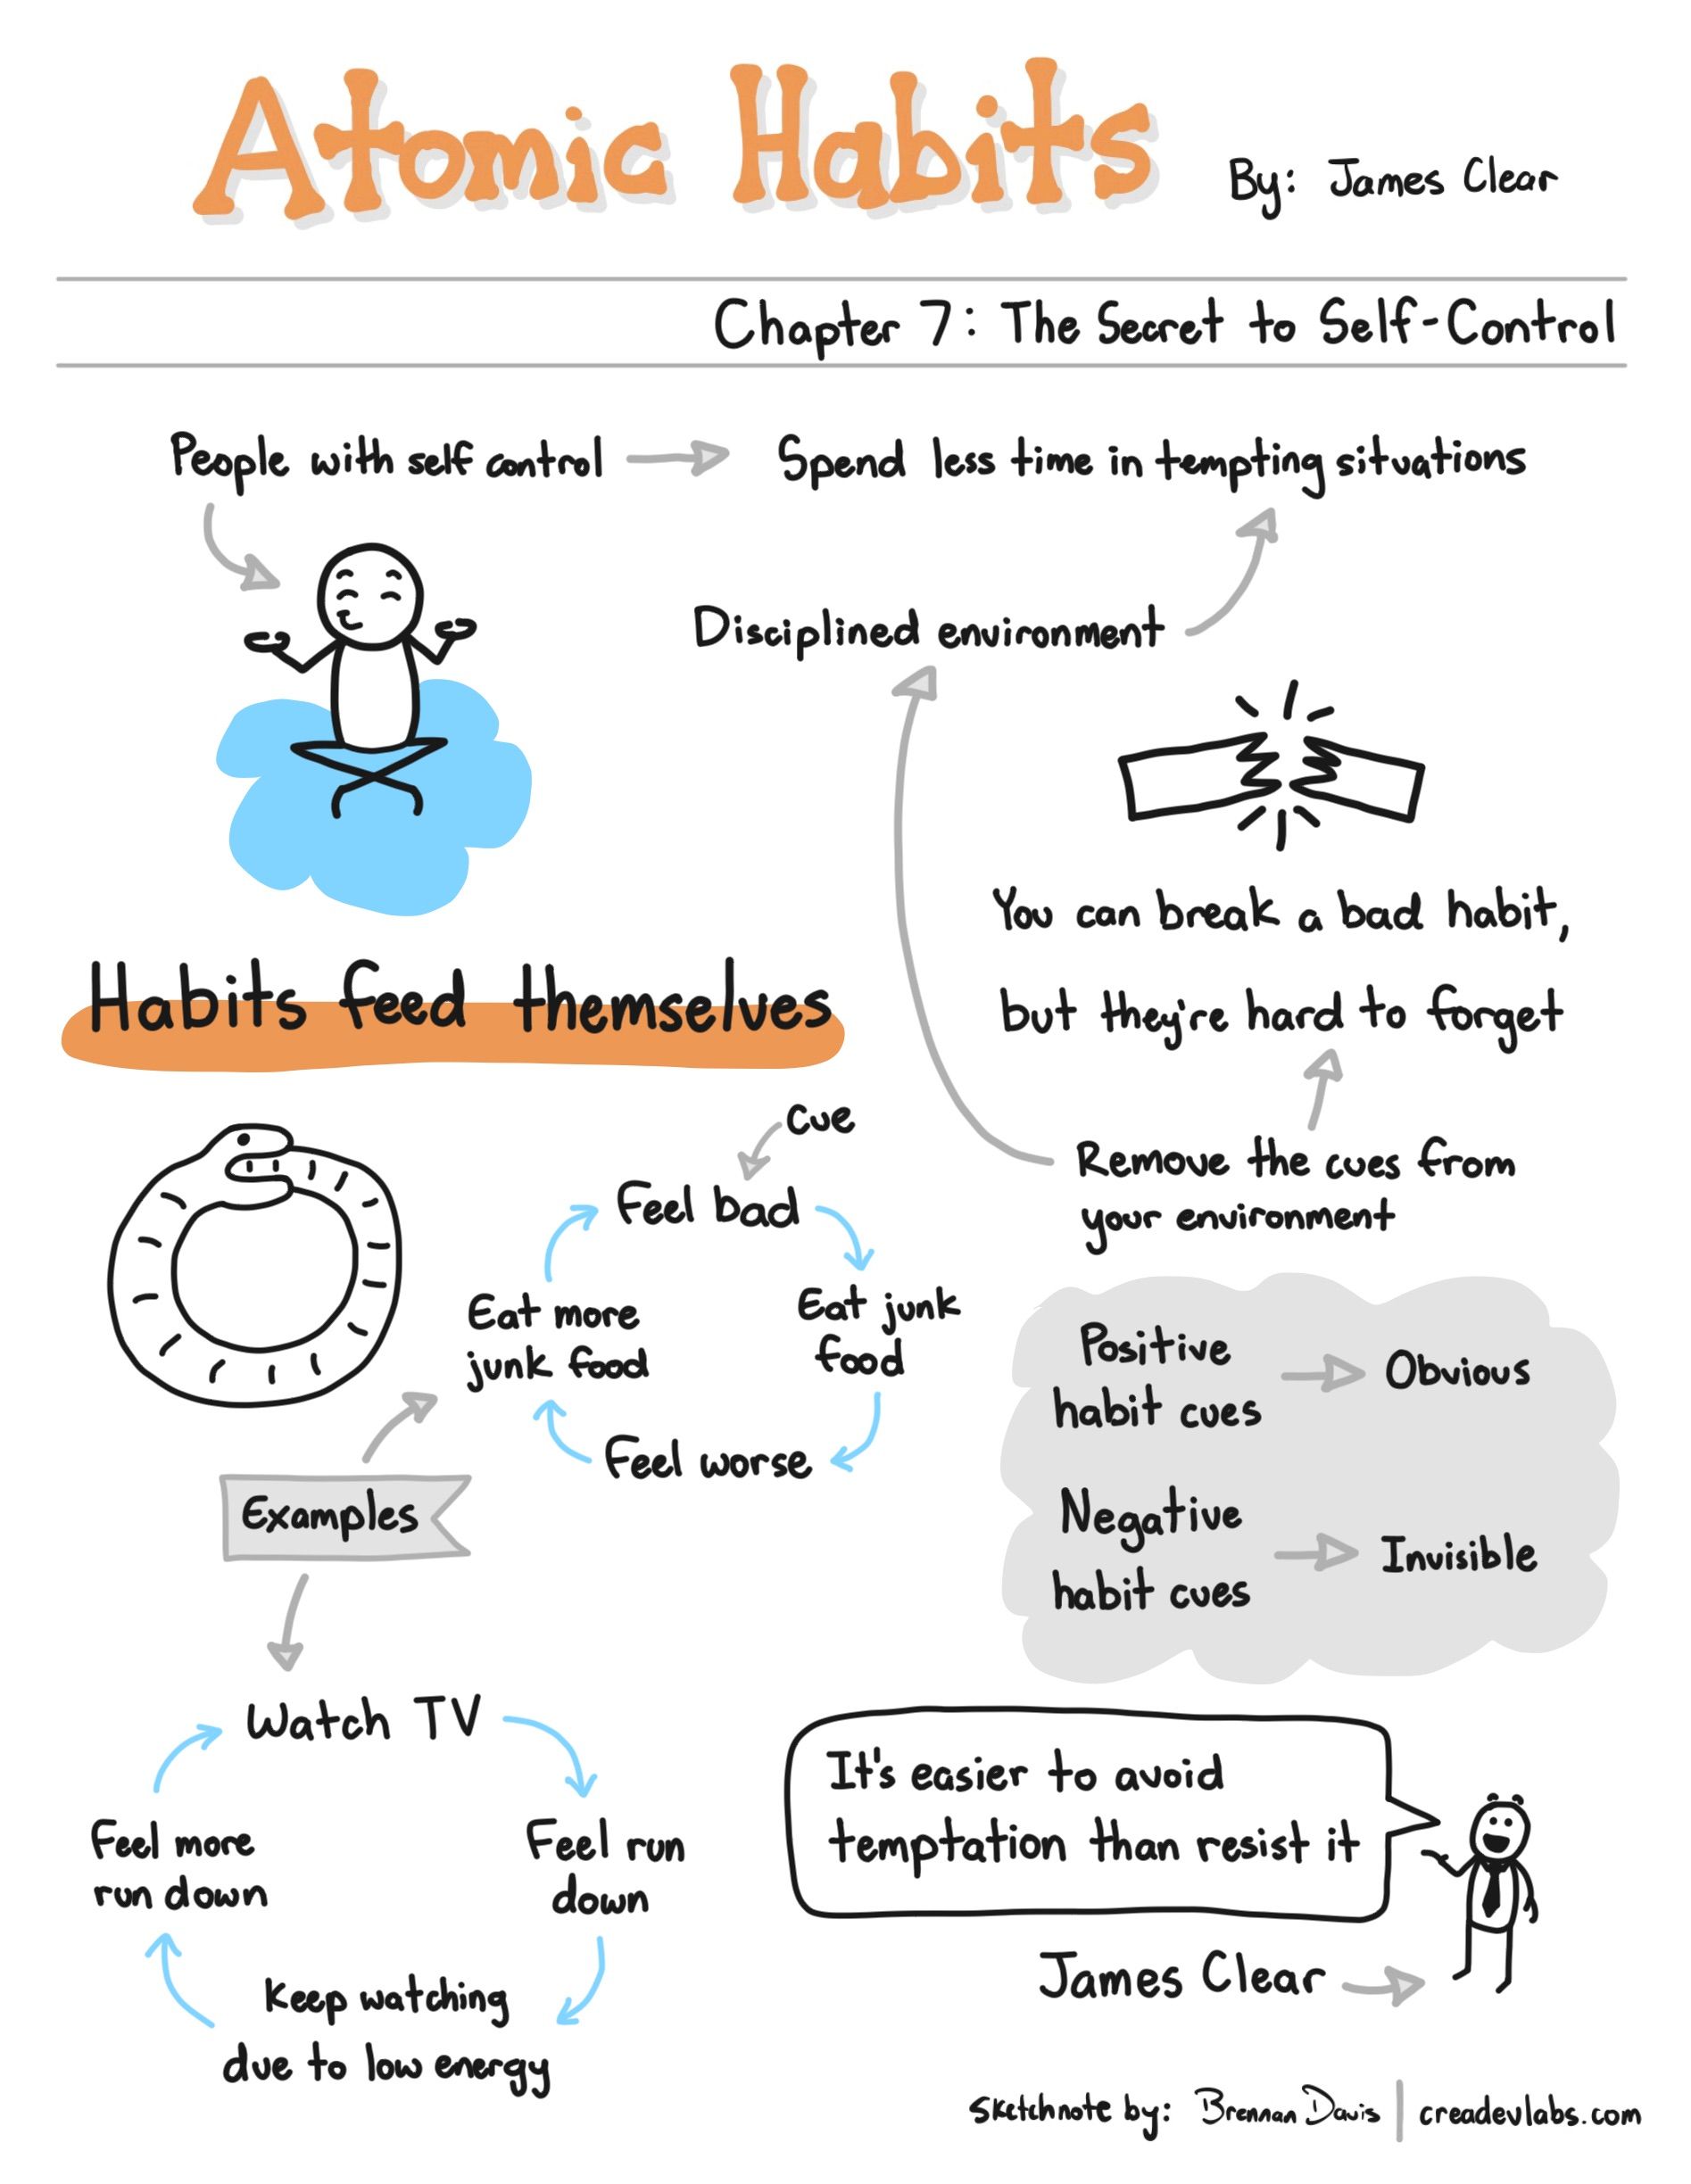 Visual Book Summary of Atomic Habits by James Clear